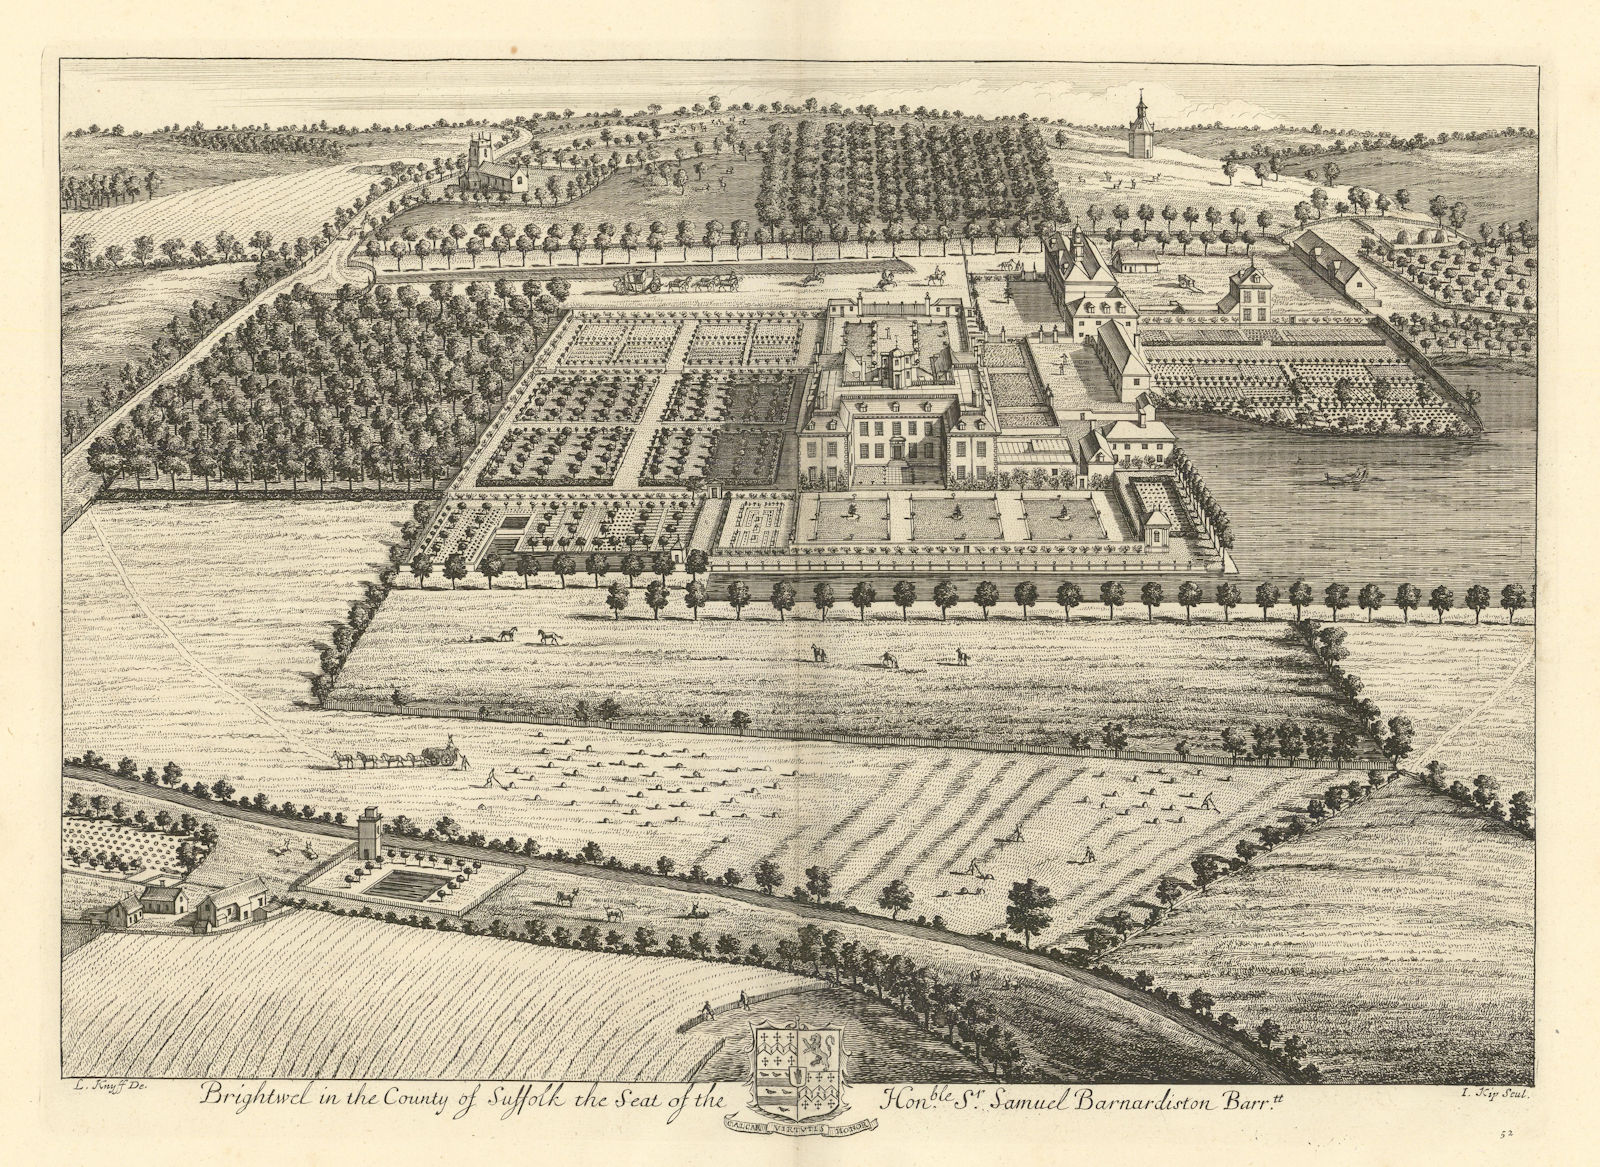 Associate Product Brightwell Hall by Kip & Knyff. "Brightwel in the County of Suffolk" 1709